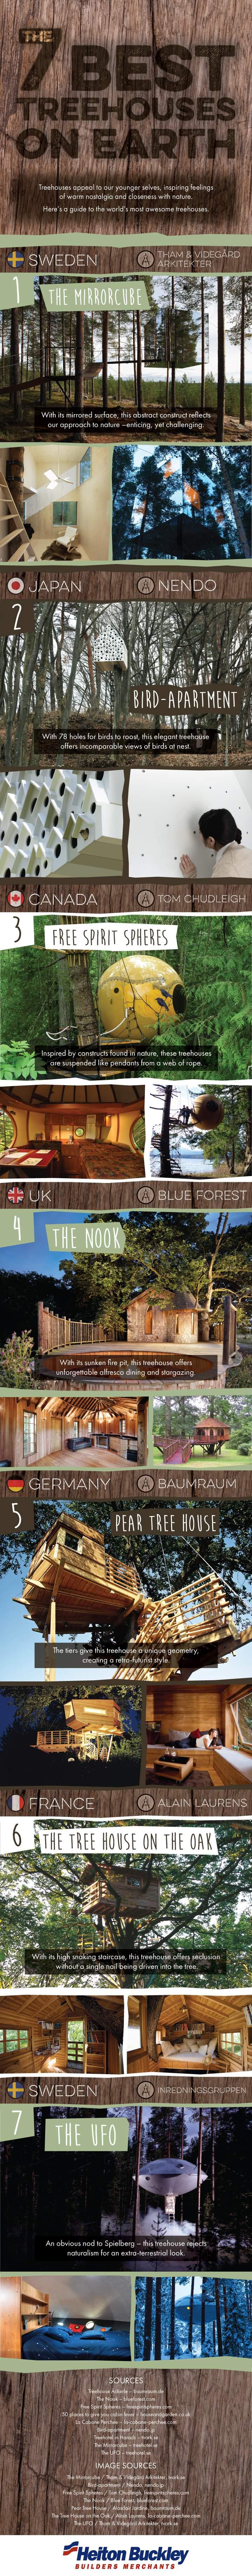 Best Tree Houses On Earth